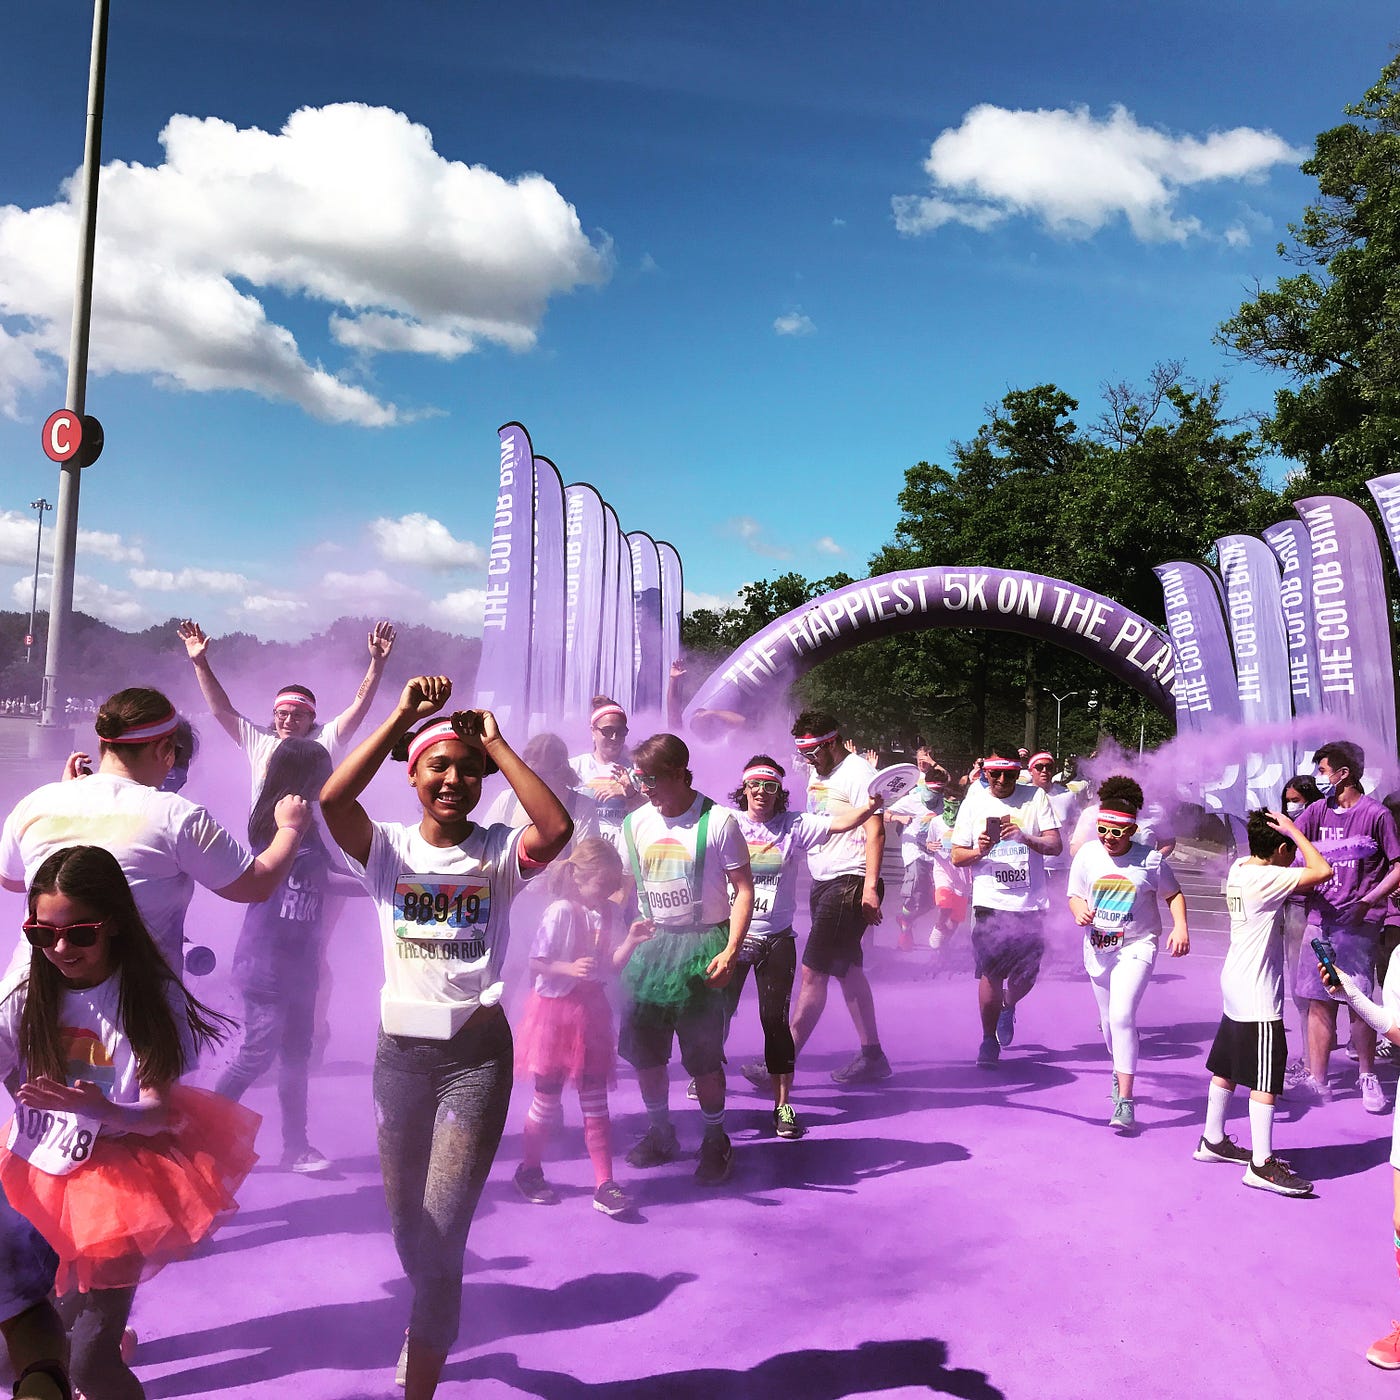 The color run 2013: How to colour yourself happy this summer — literally -  Chatelaine